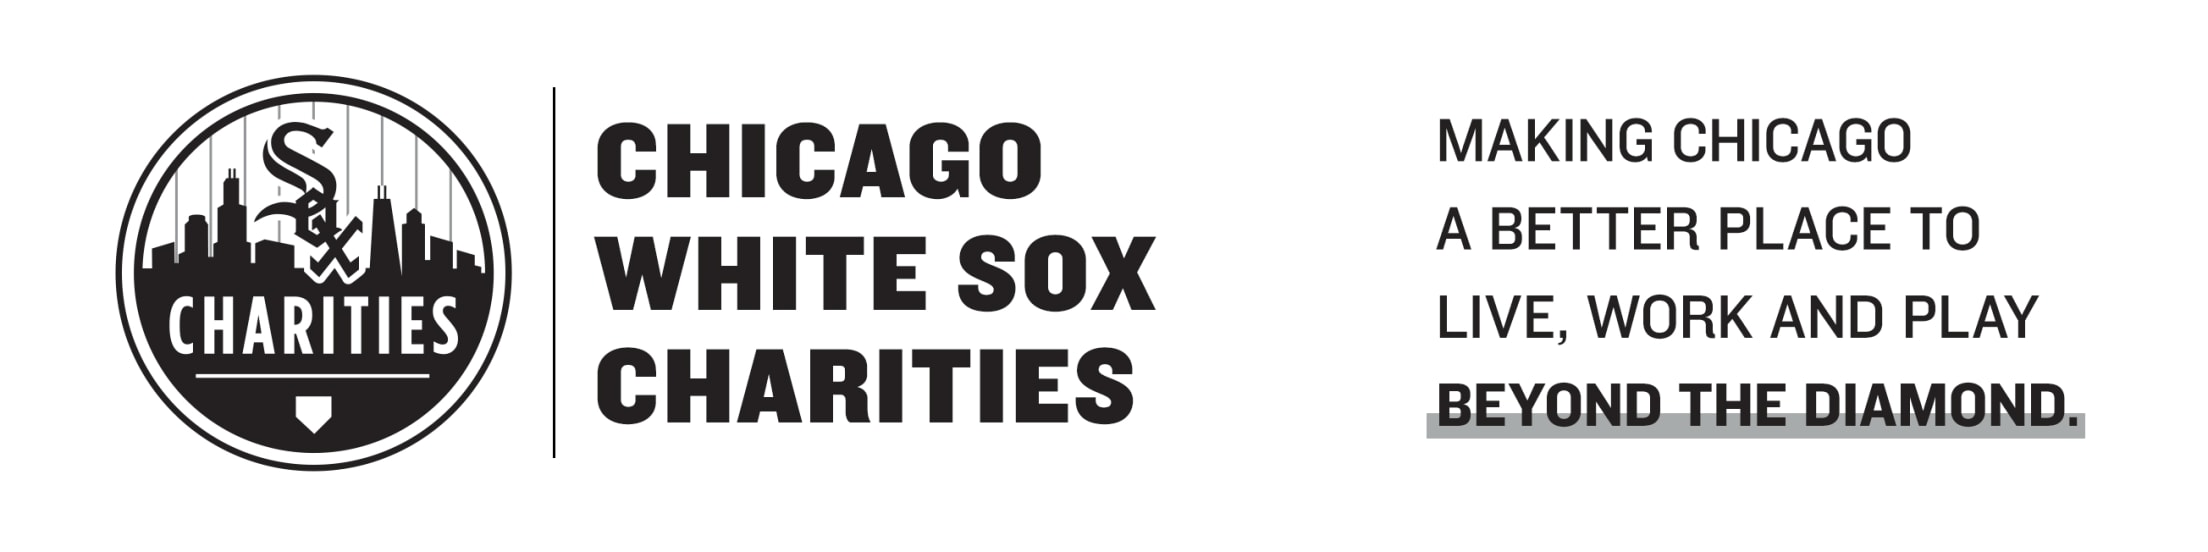 Mark Your Calendar: June Ballpark Promotions, by Chicago White Sox